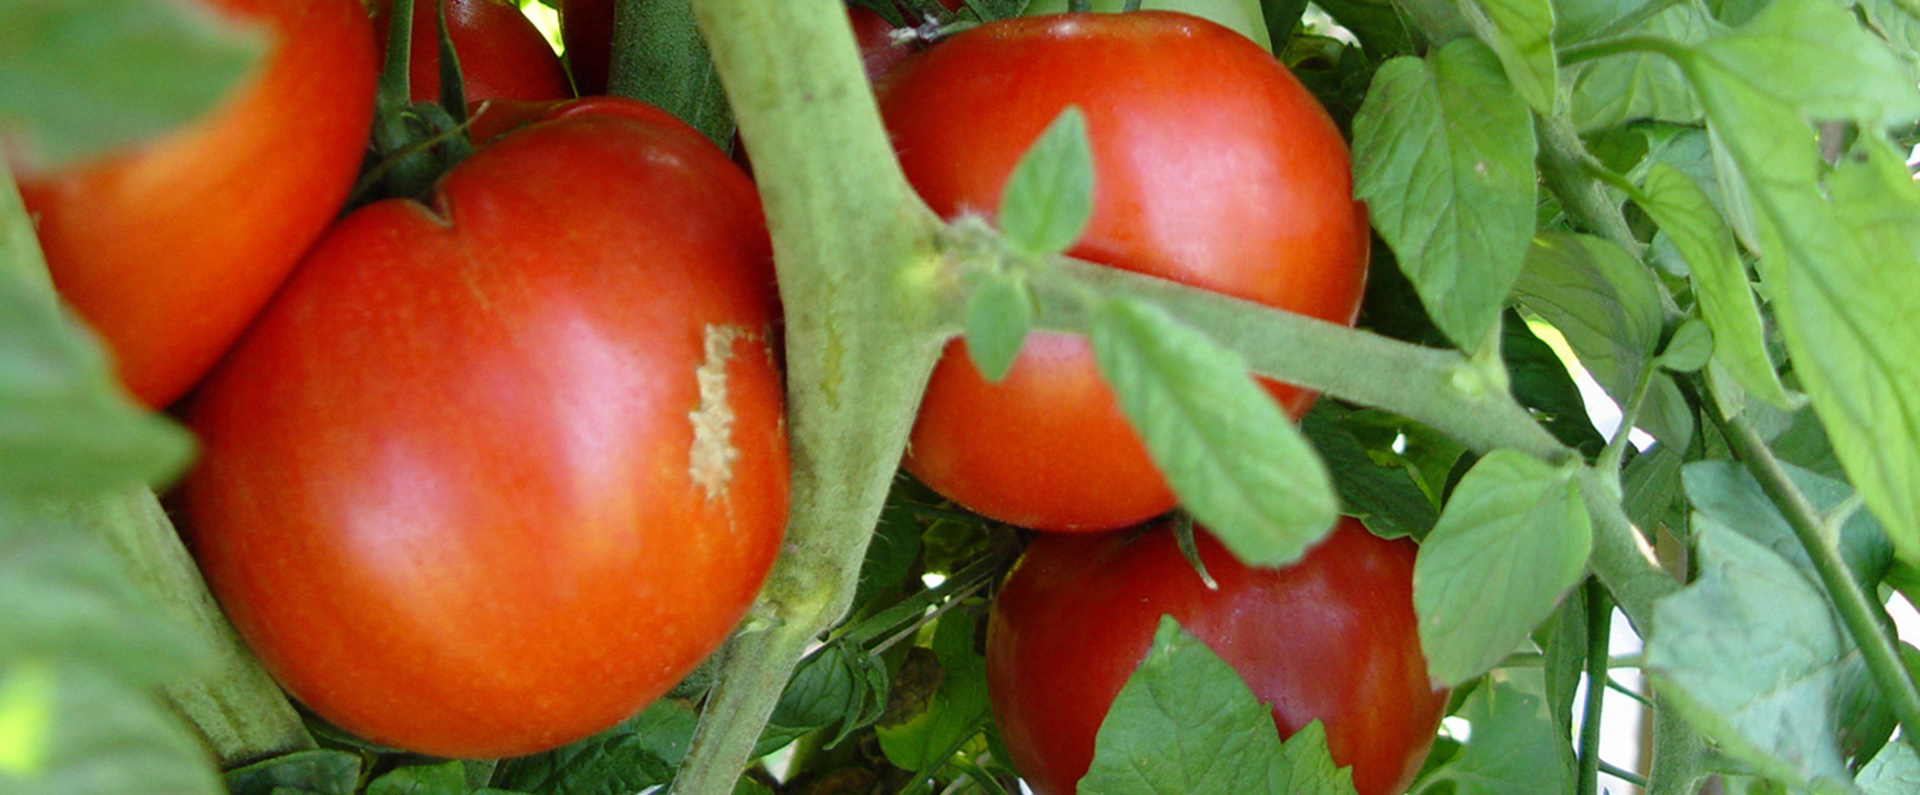 Fresh tomatoes growing on a vine